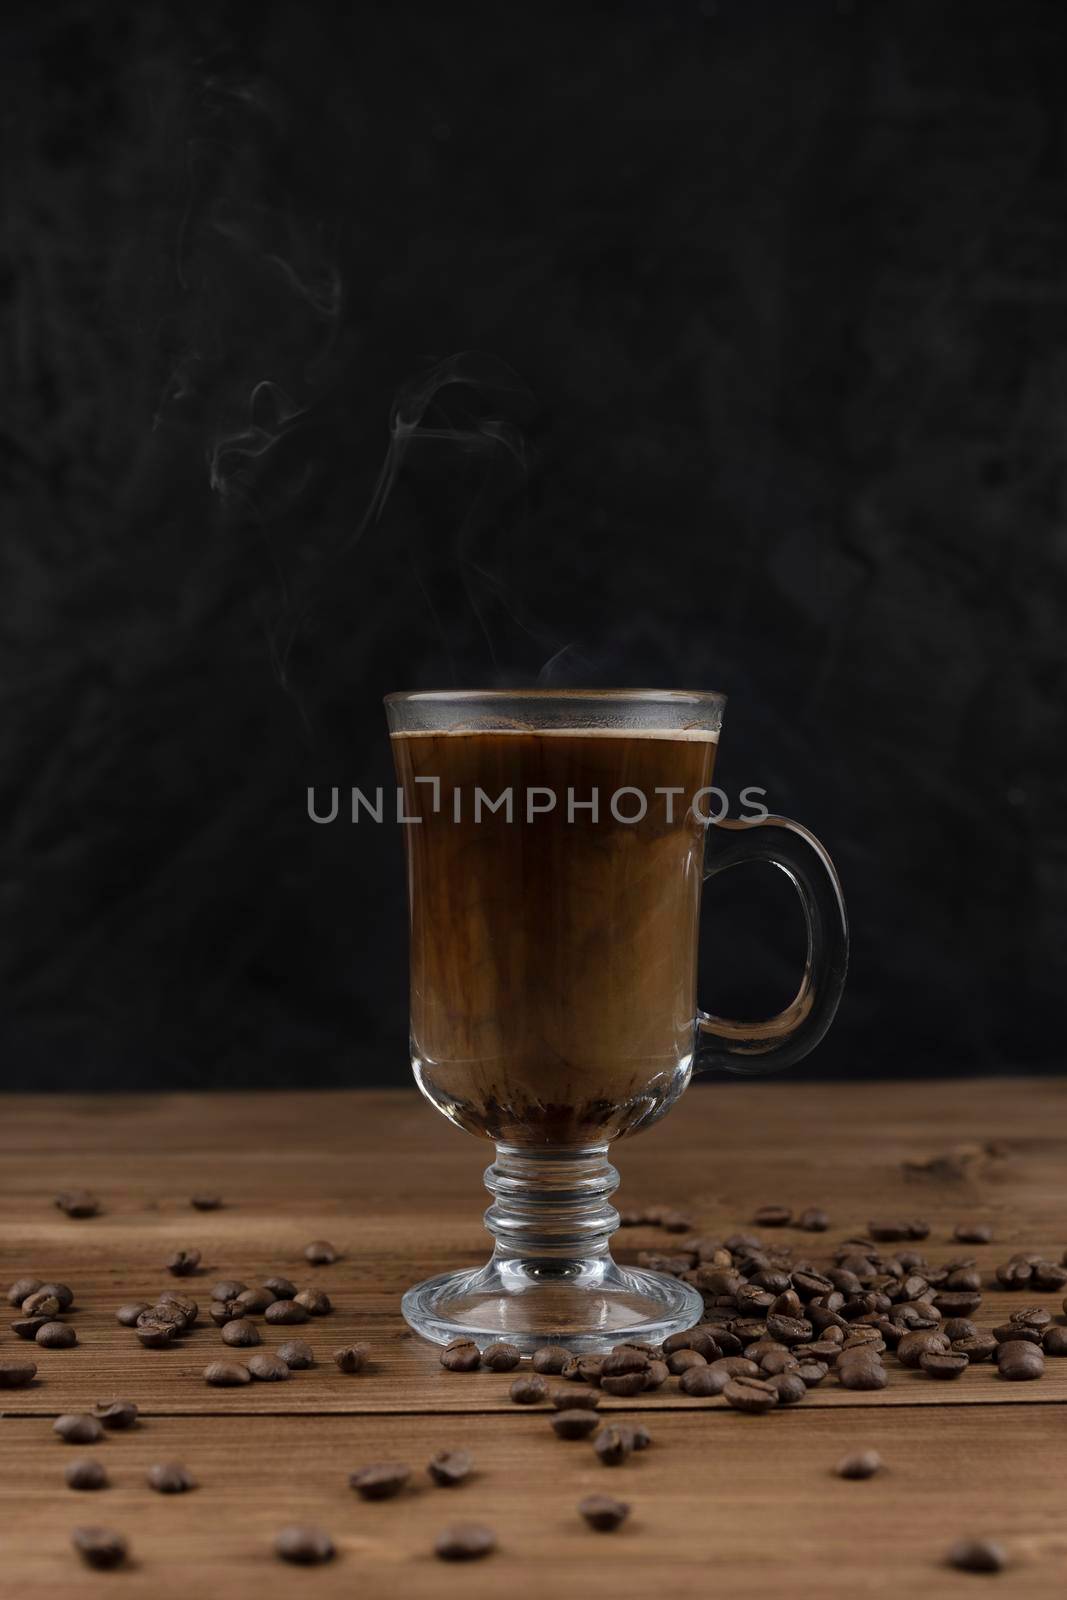 Steaming coffee over wooden surface and black background by sashokddt